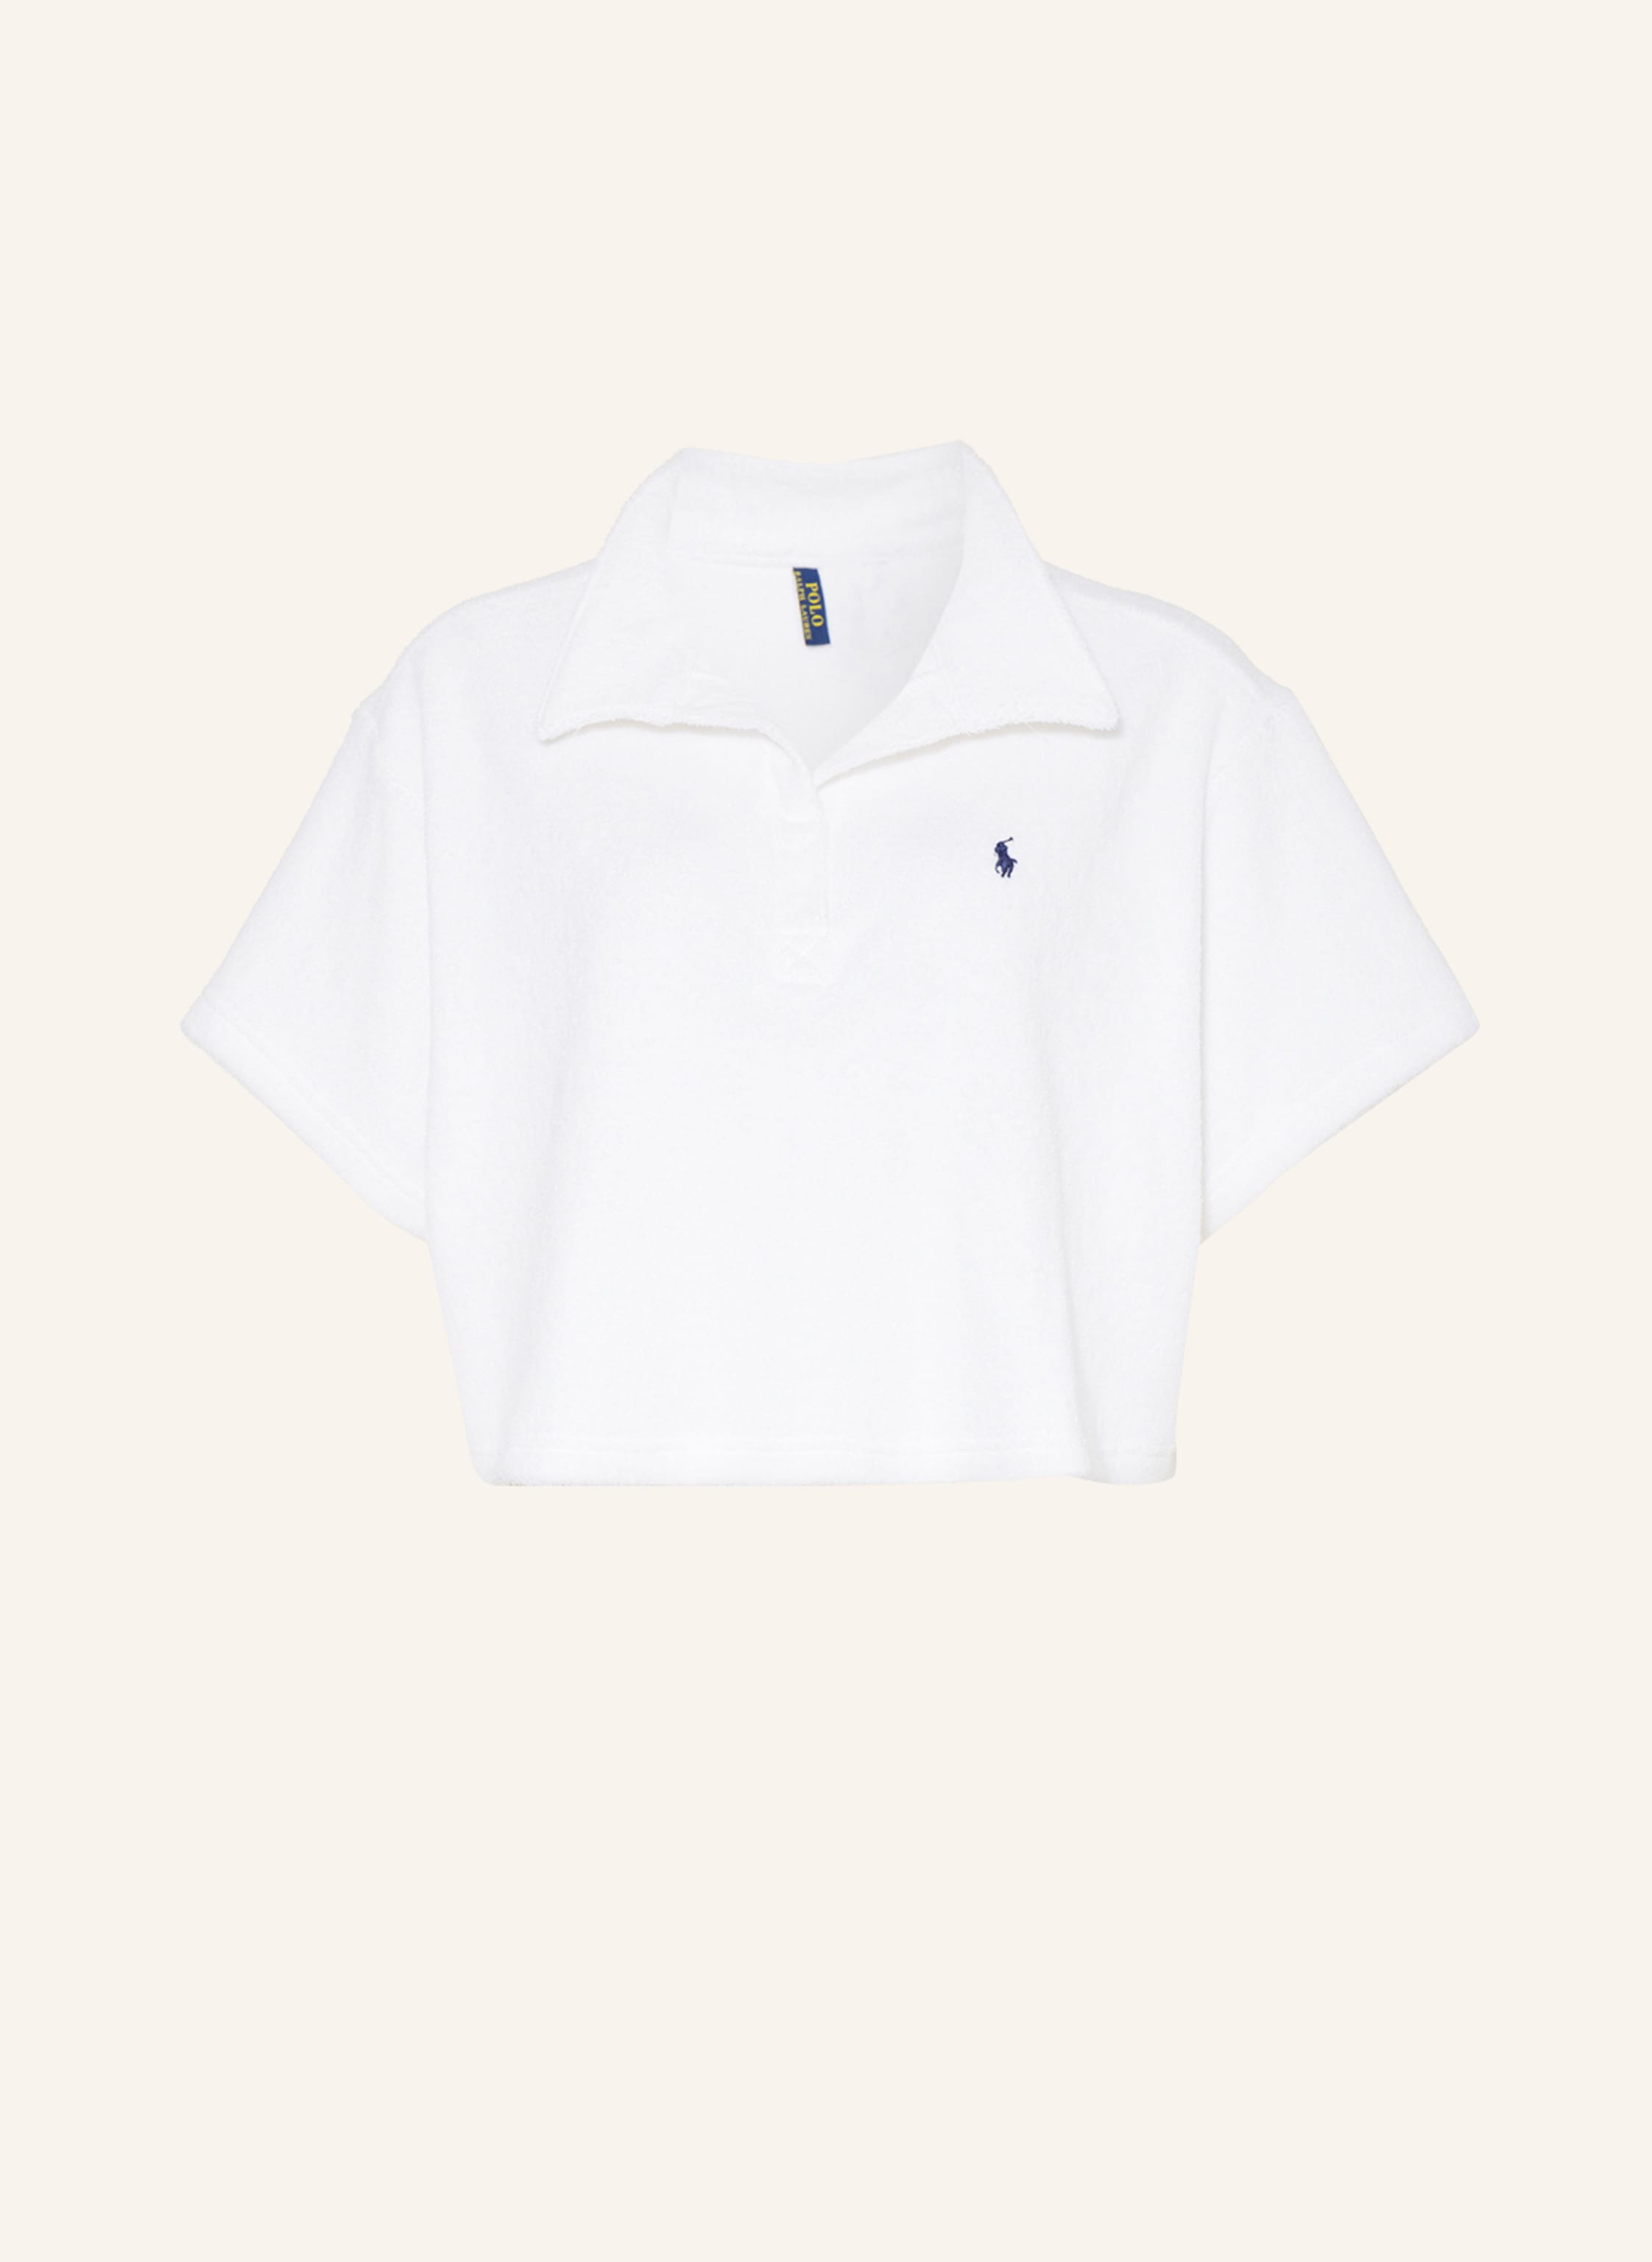 POLO RALPH LAUREN Set: Cropped shirt and shorts in white | Breuninger